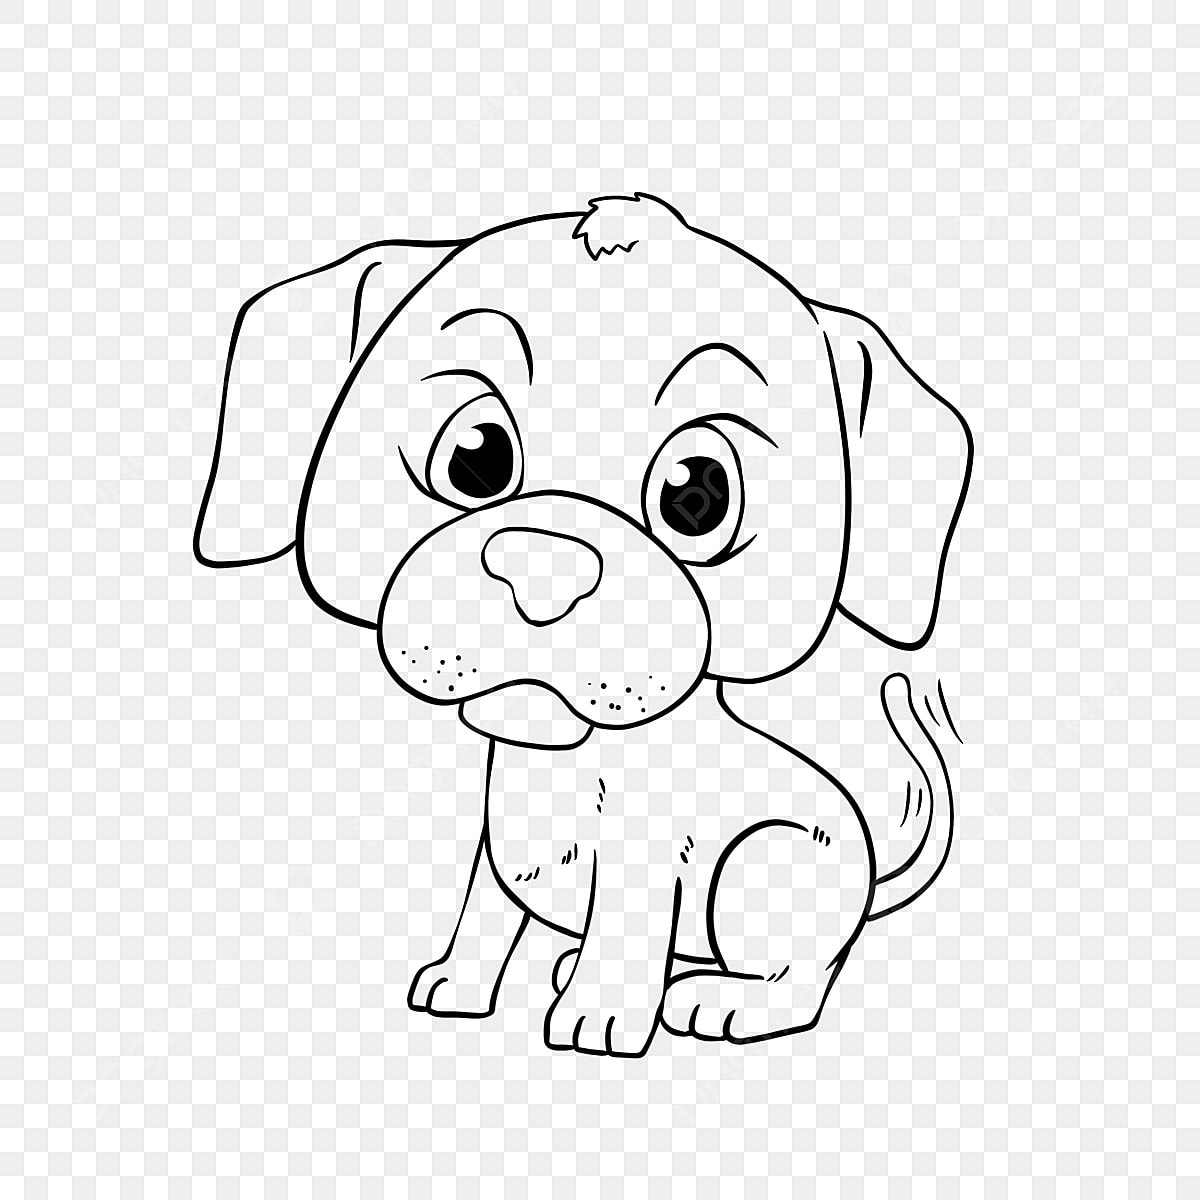 Puppy drawing clipart images free download png transparent background